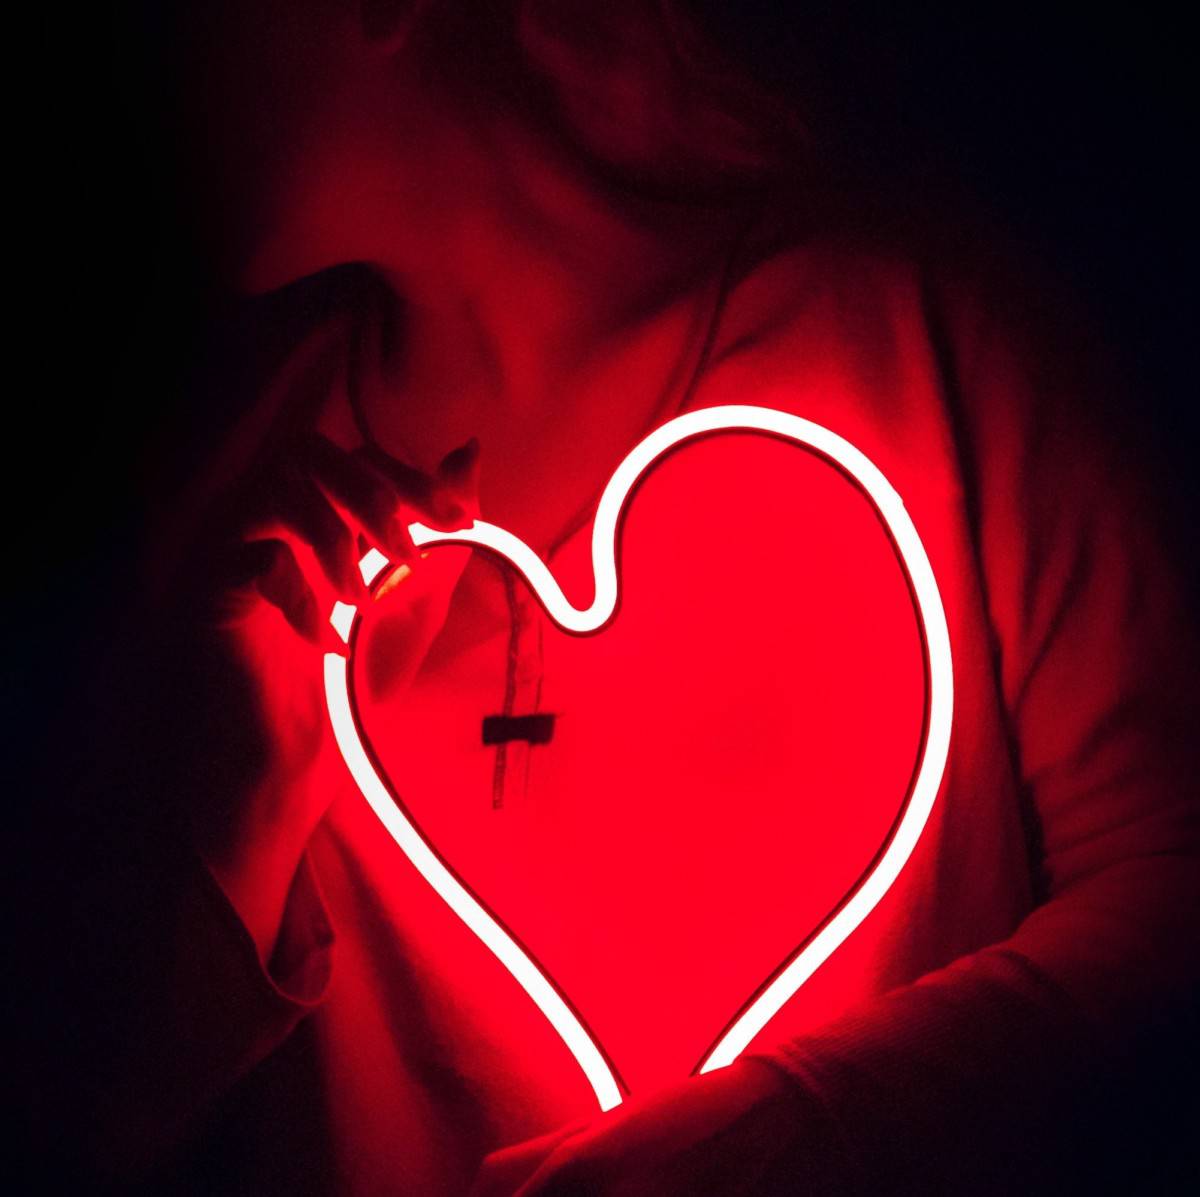 A woman holding a red heart neon sign in the dark, symbolizing customer care.